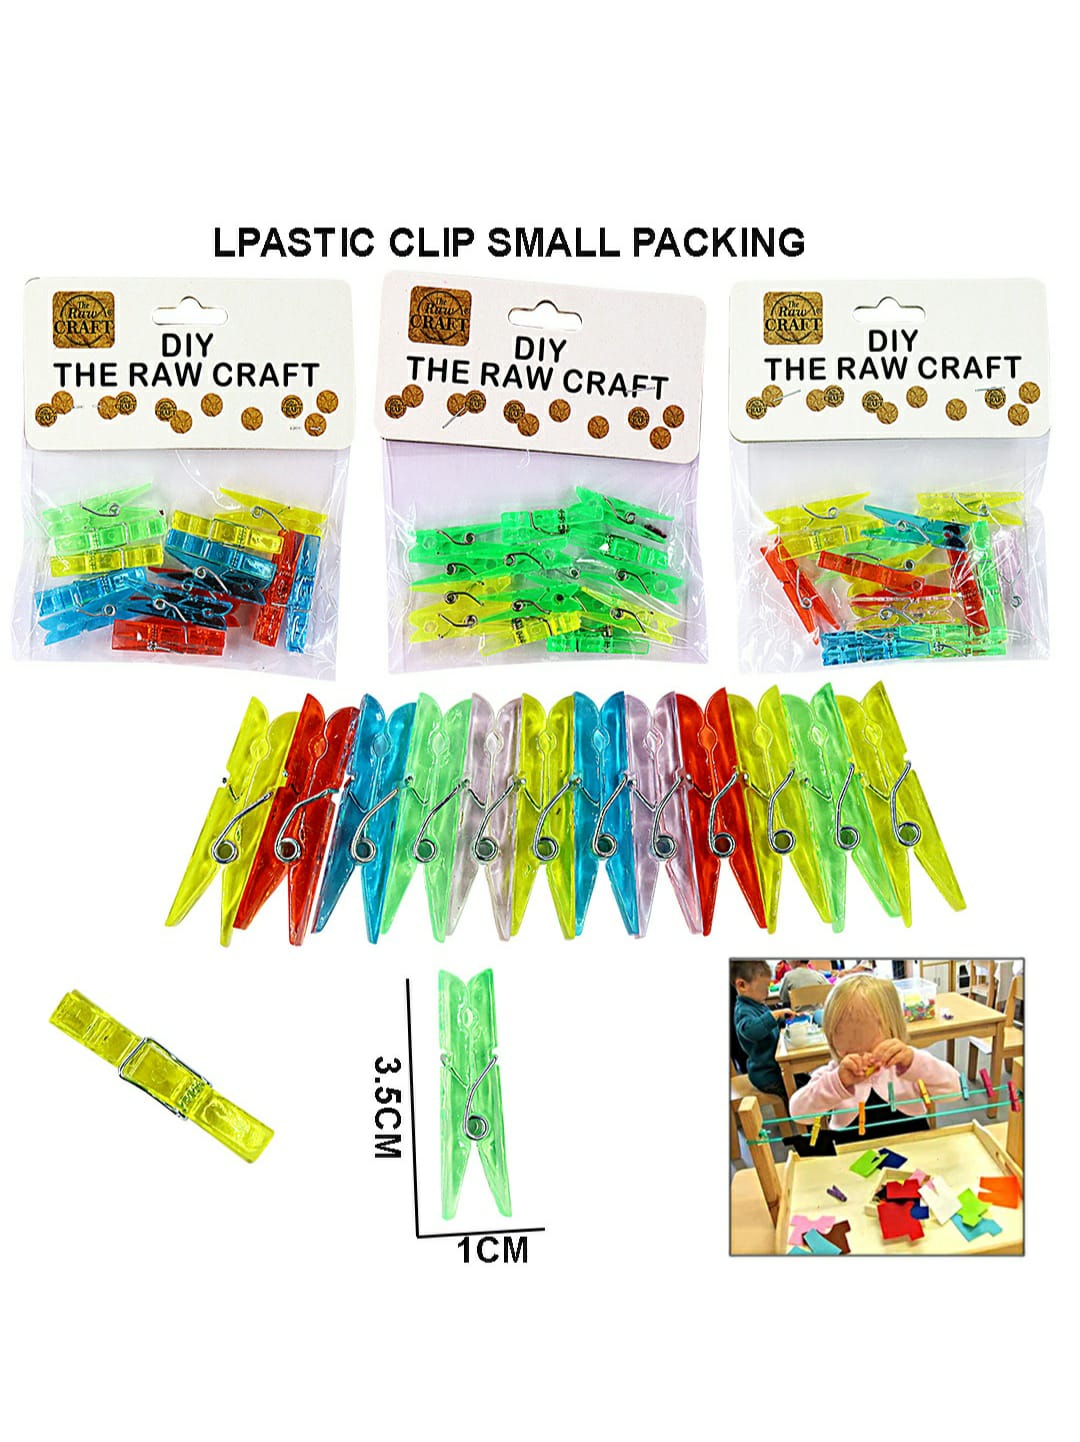 Plastic Clip Small Packing 004545Pl | INKARTO